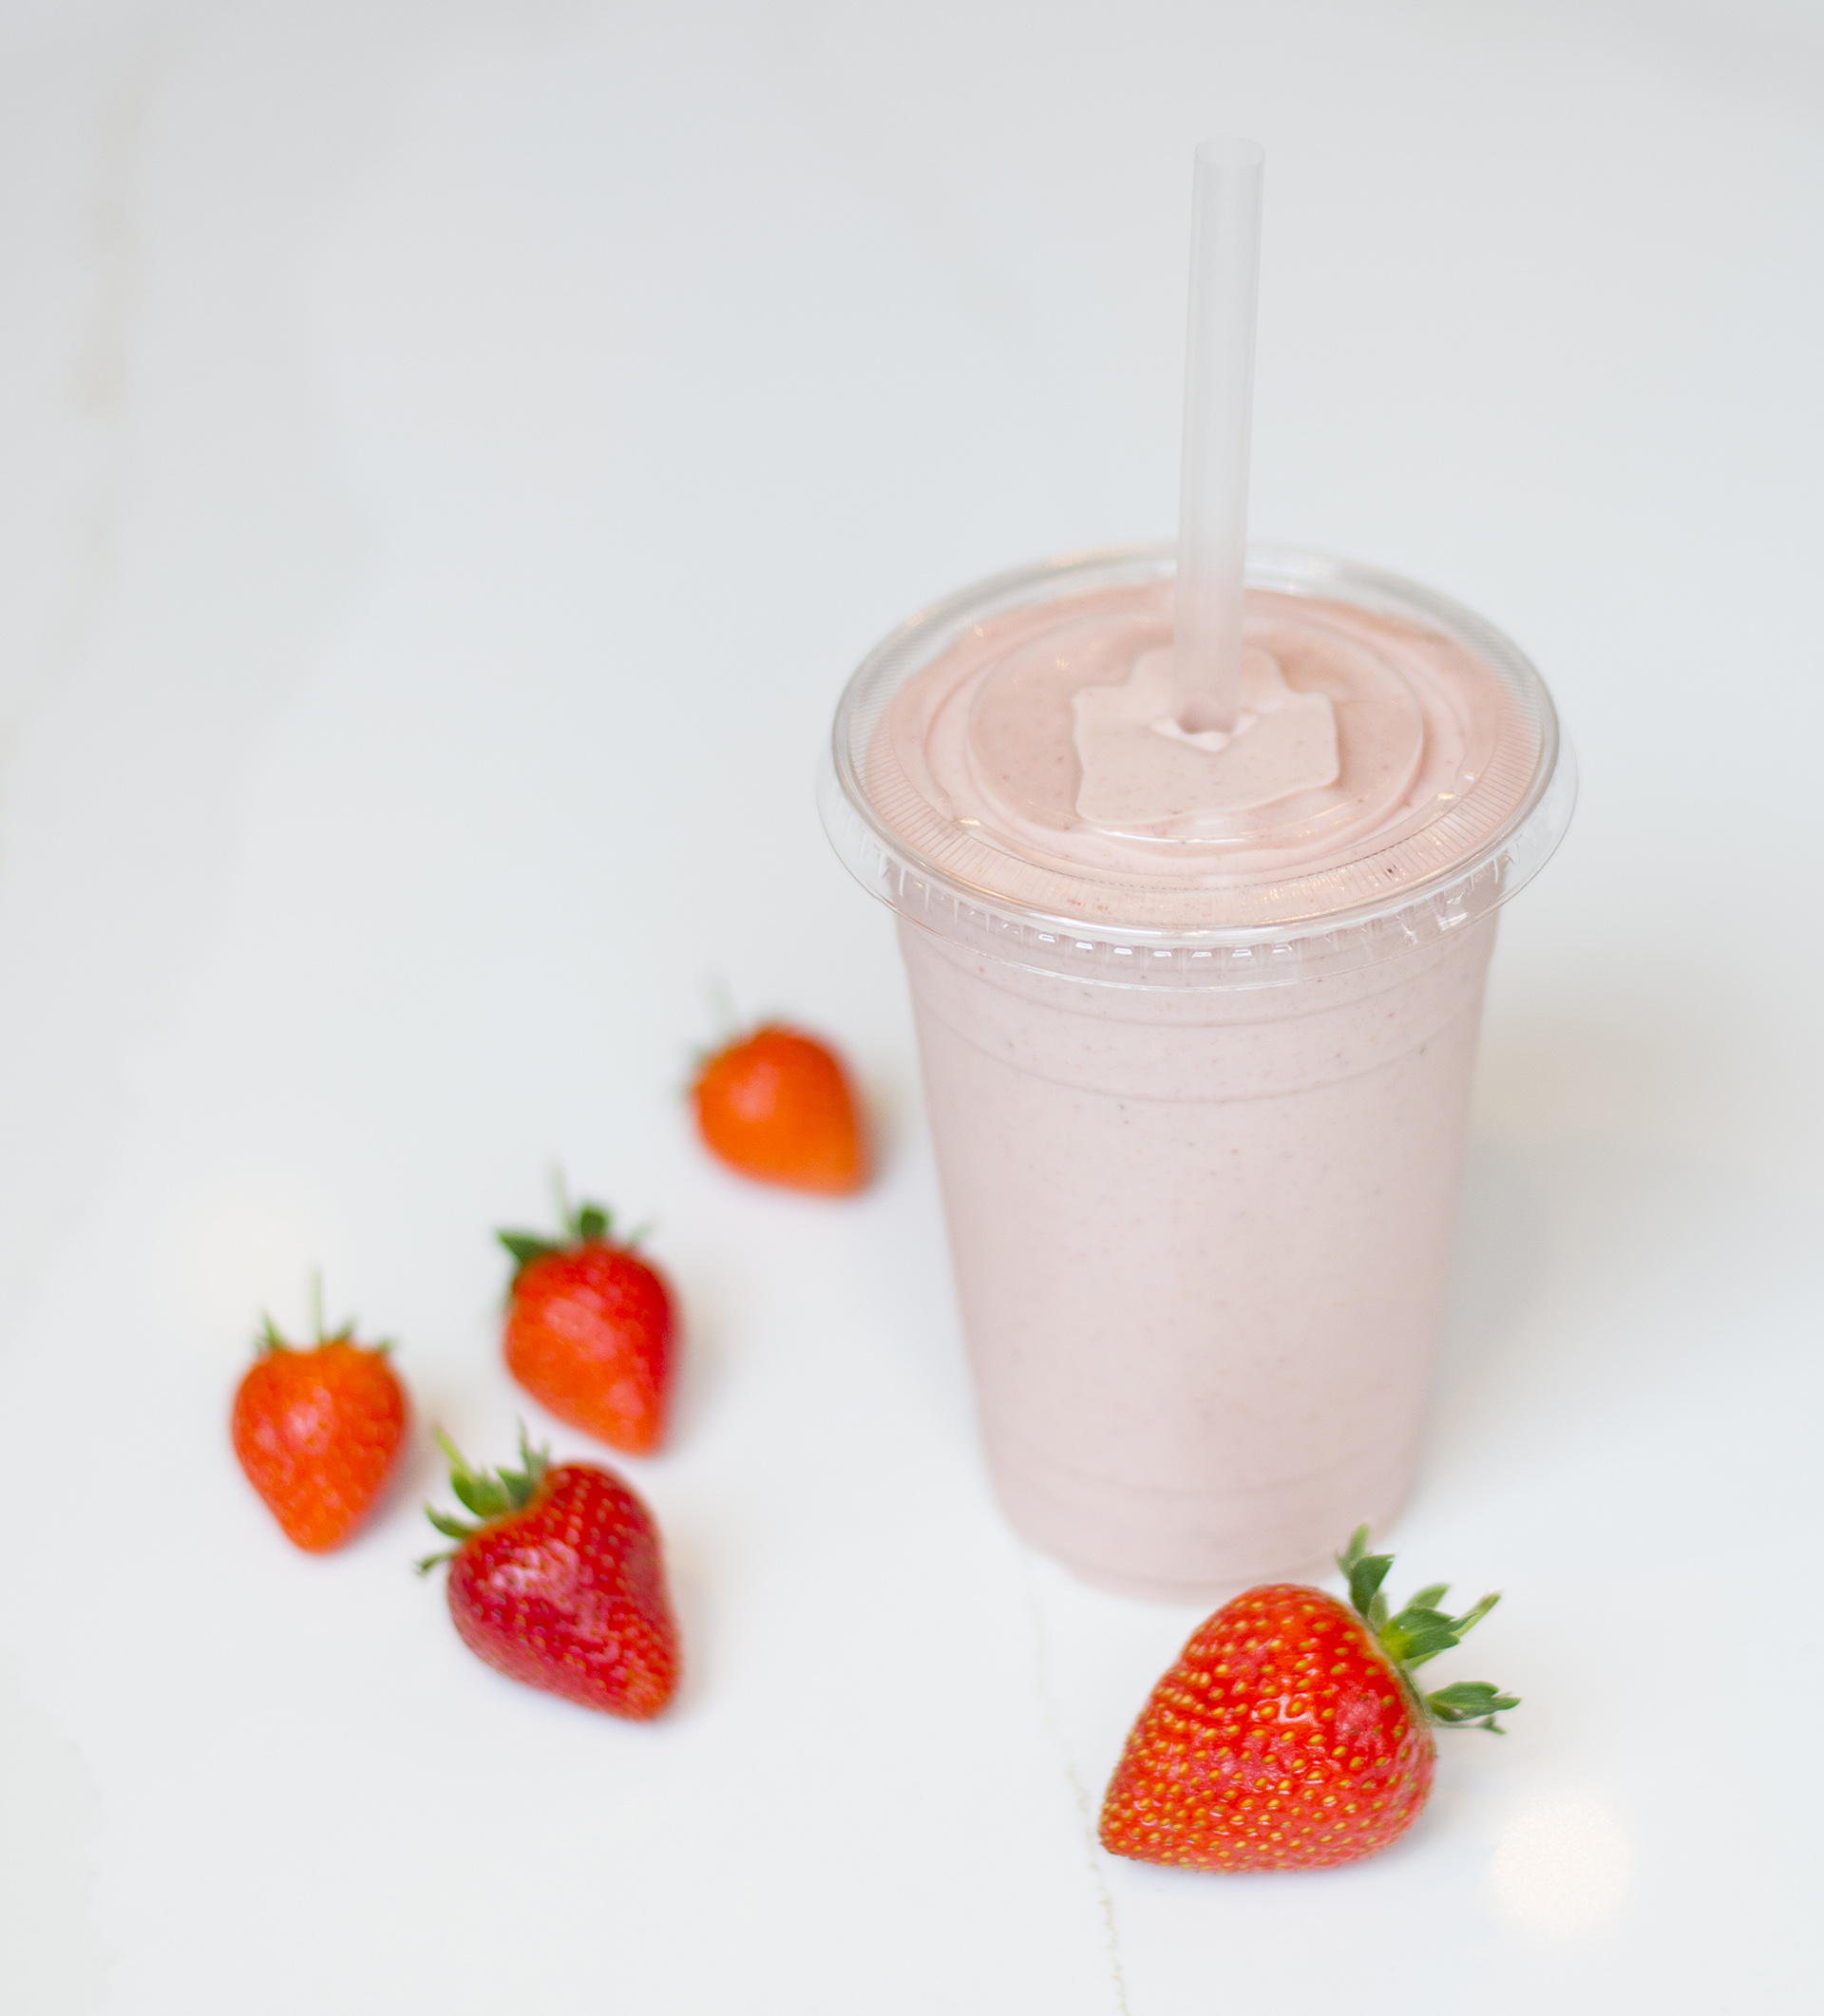 STRAWBERRY BANANA PROTEIN SMOOTHIE | home cooking with julie